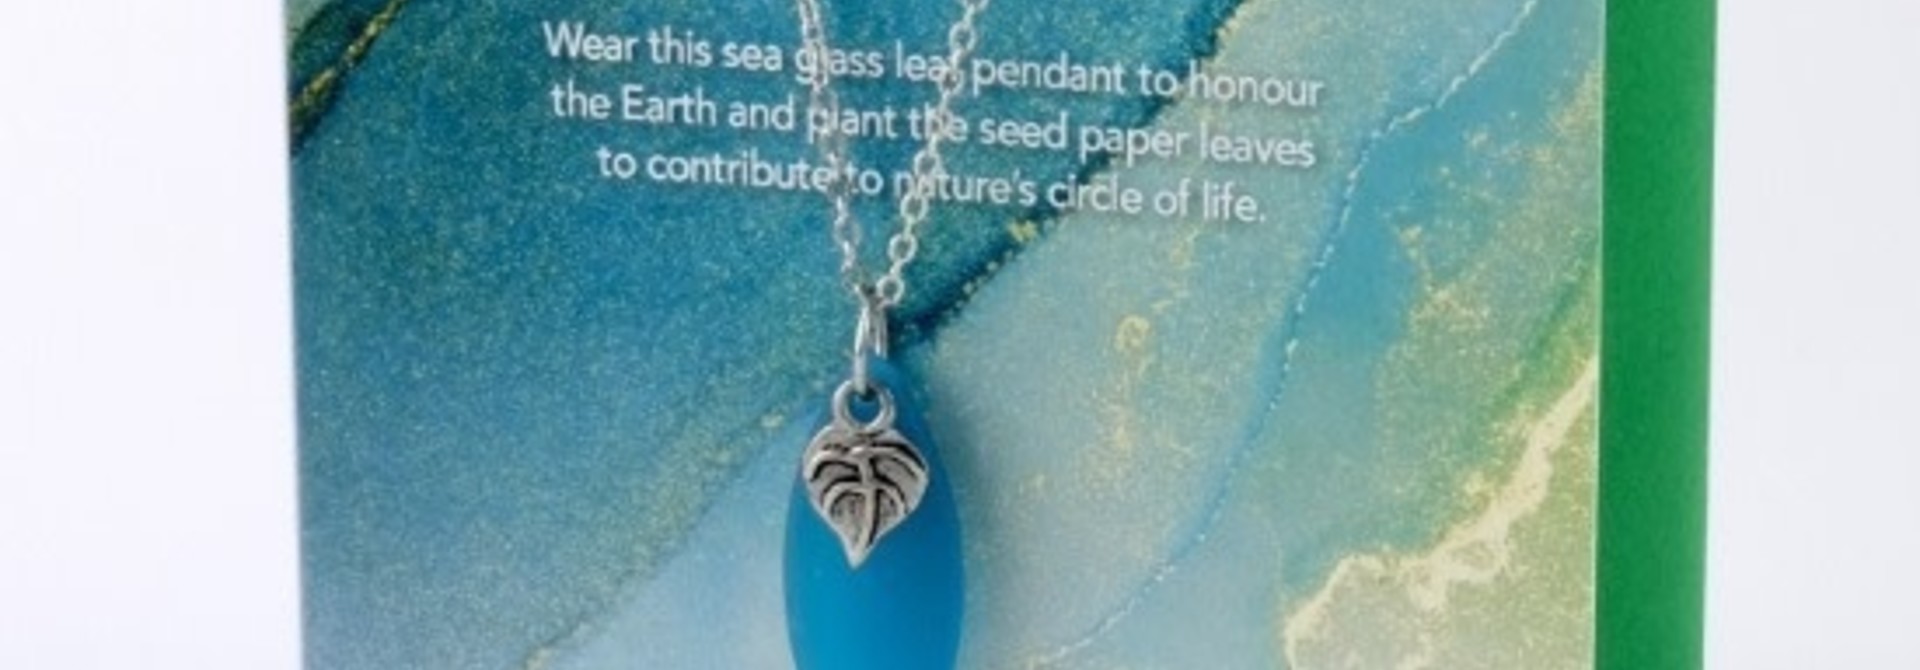 Mini Greeting Card with Leaf Teal Sea Glass necklace